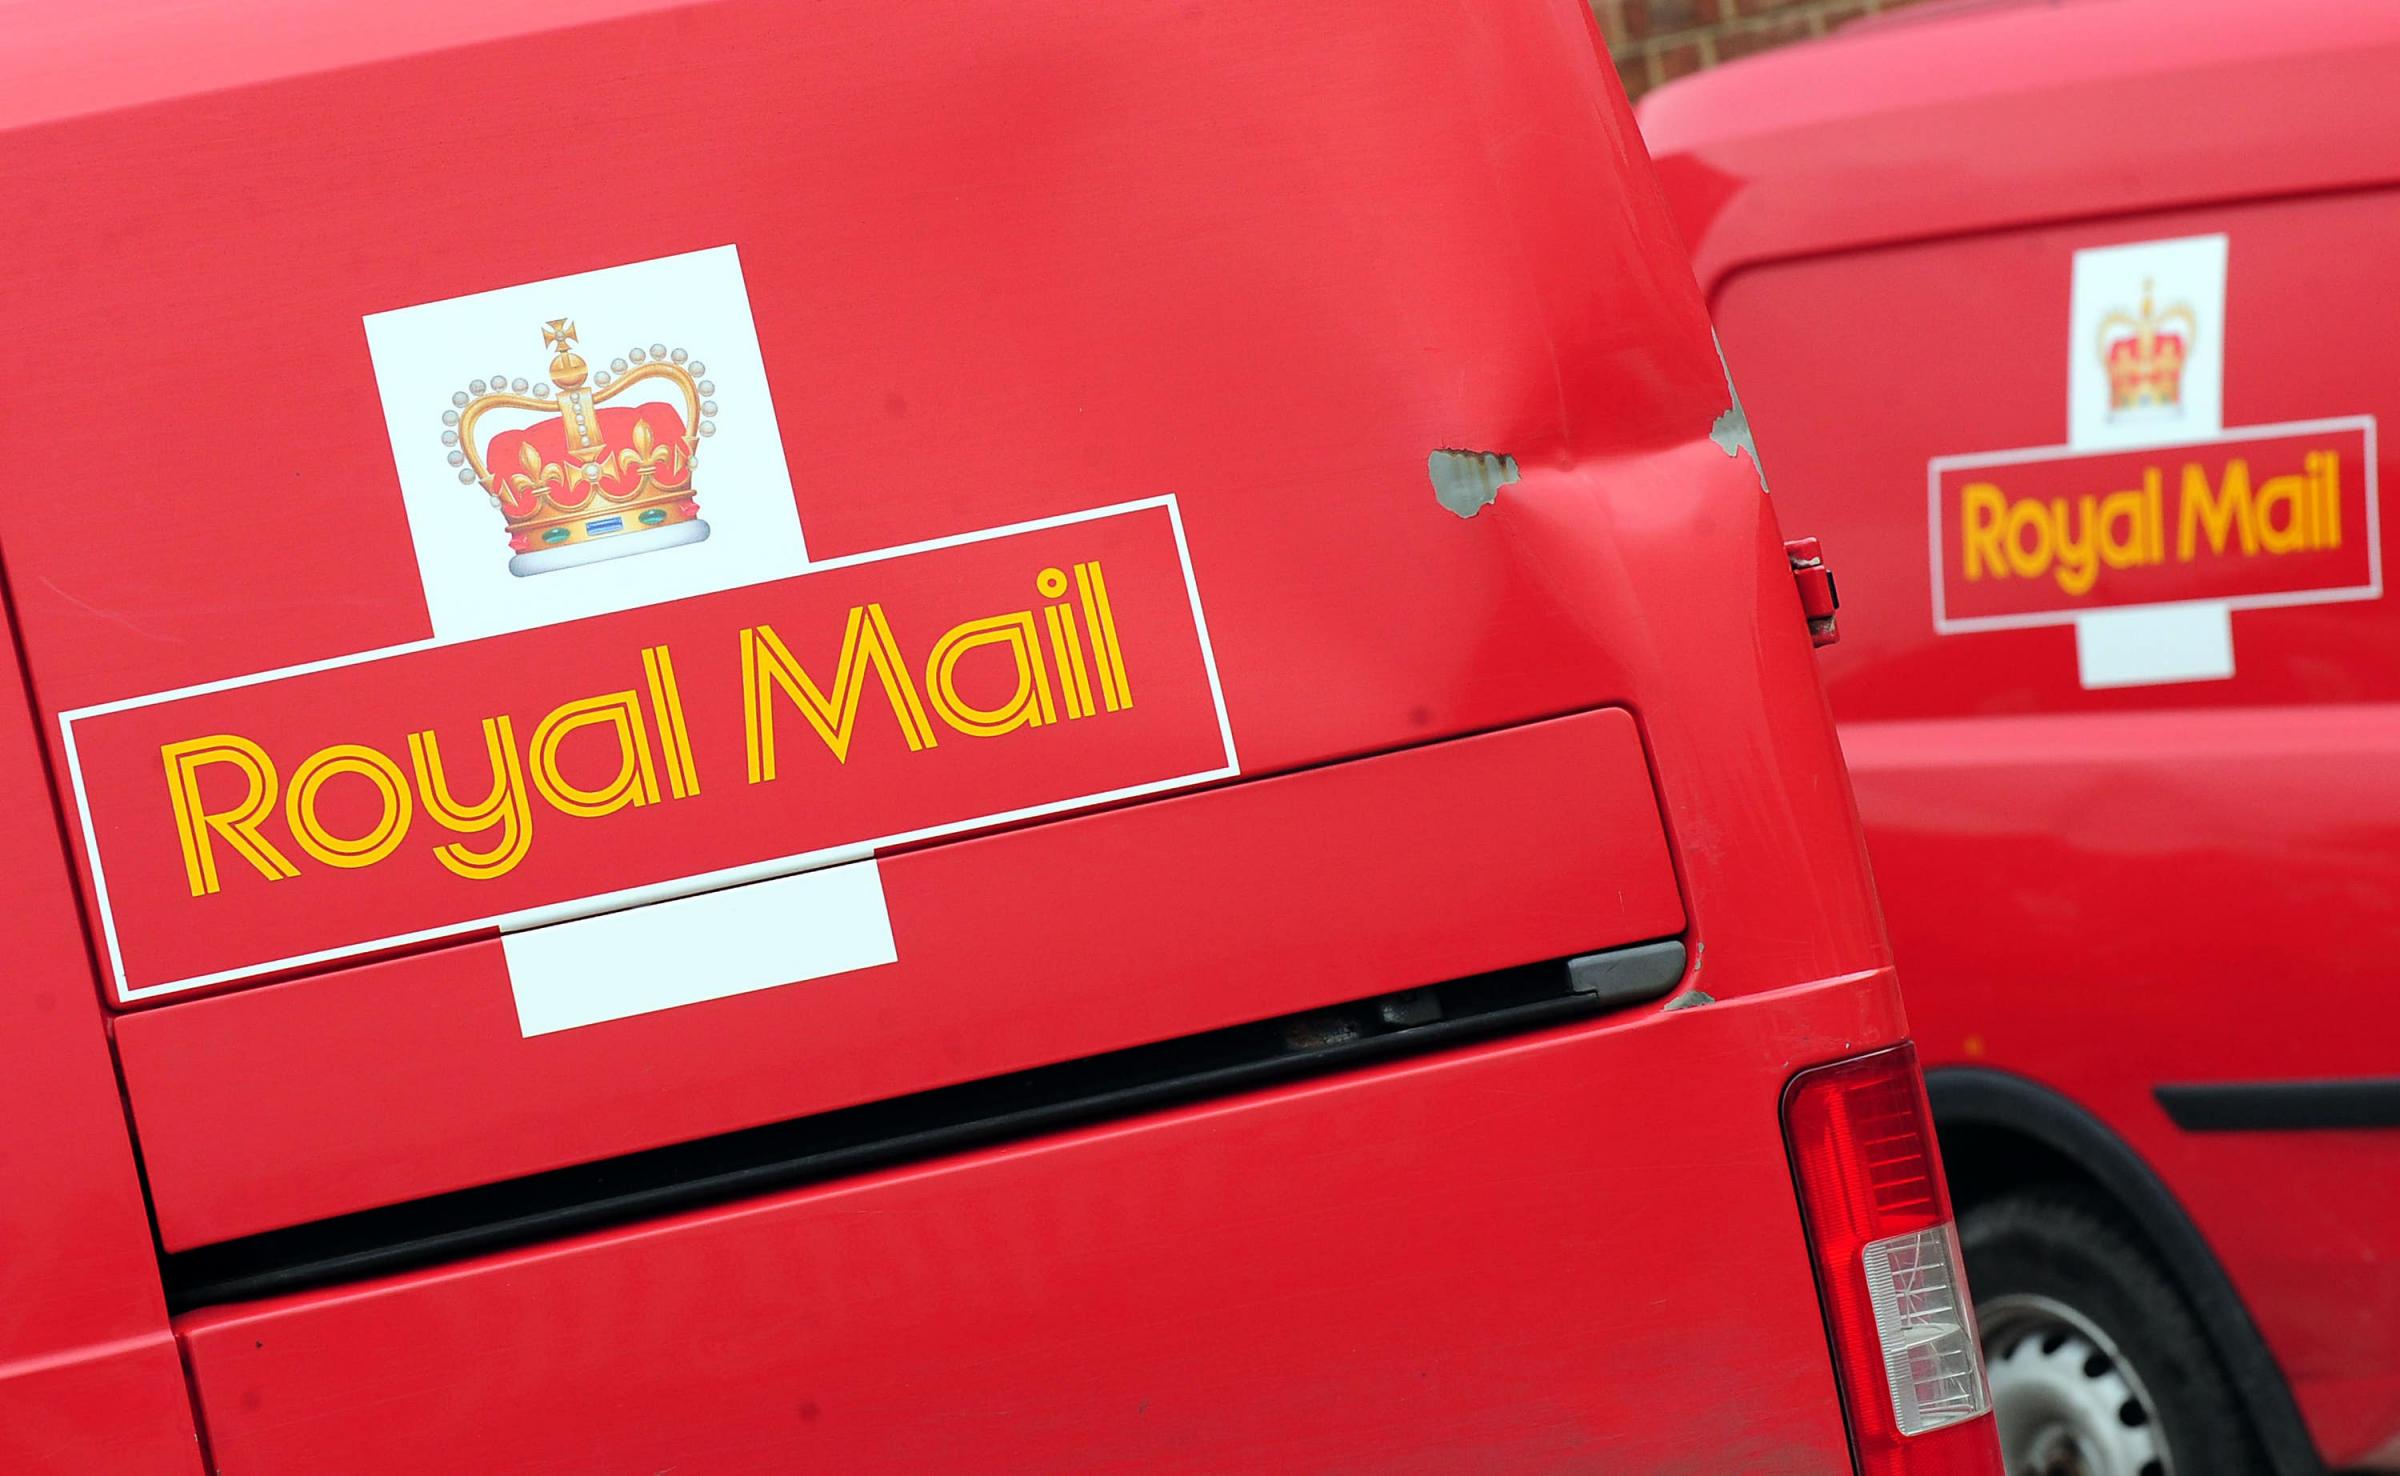 Royal Mail strikes: Four day strike over August and September to take place, Union confirms